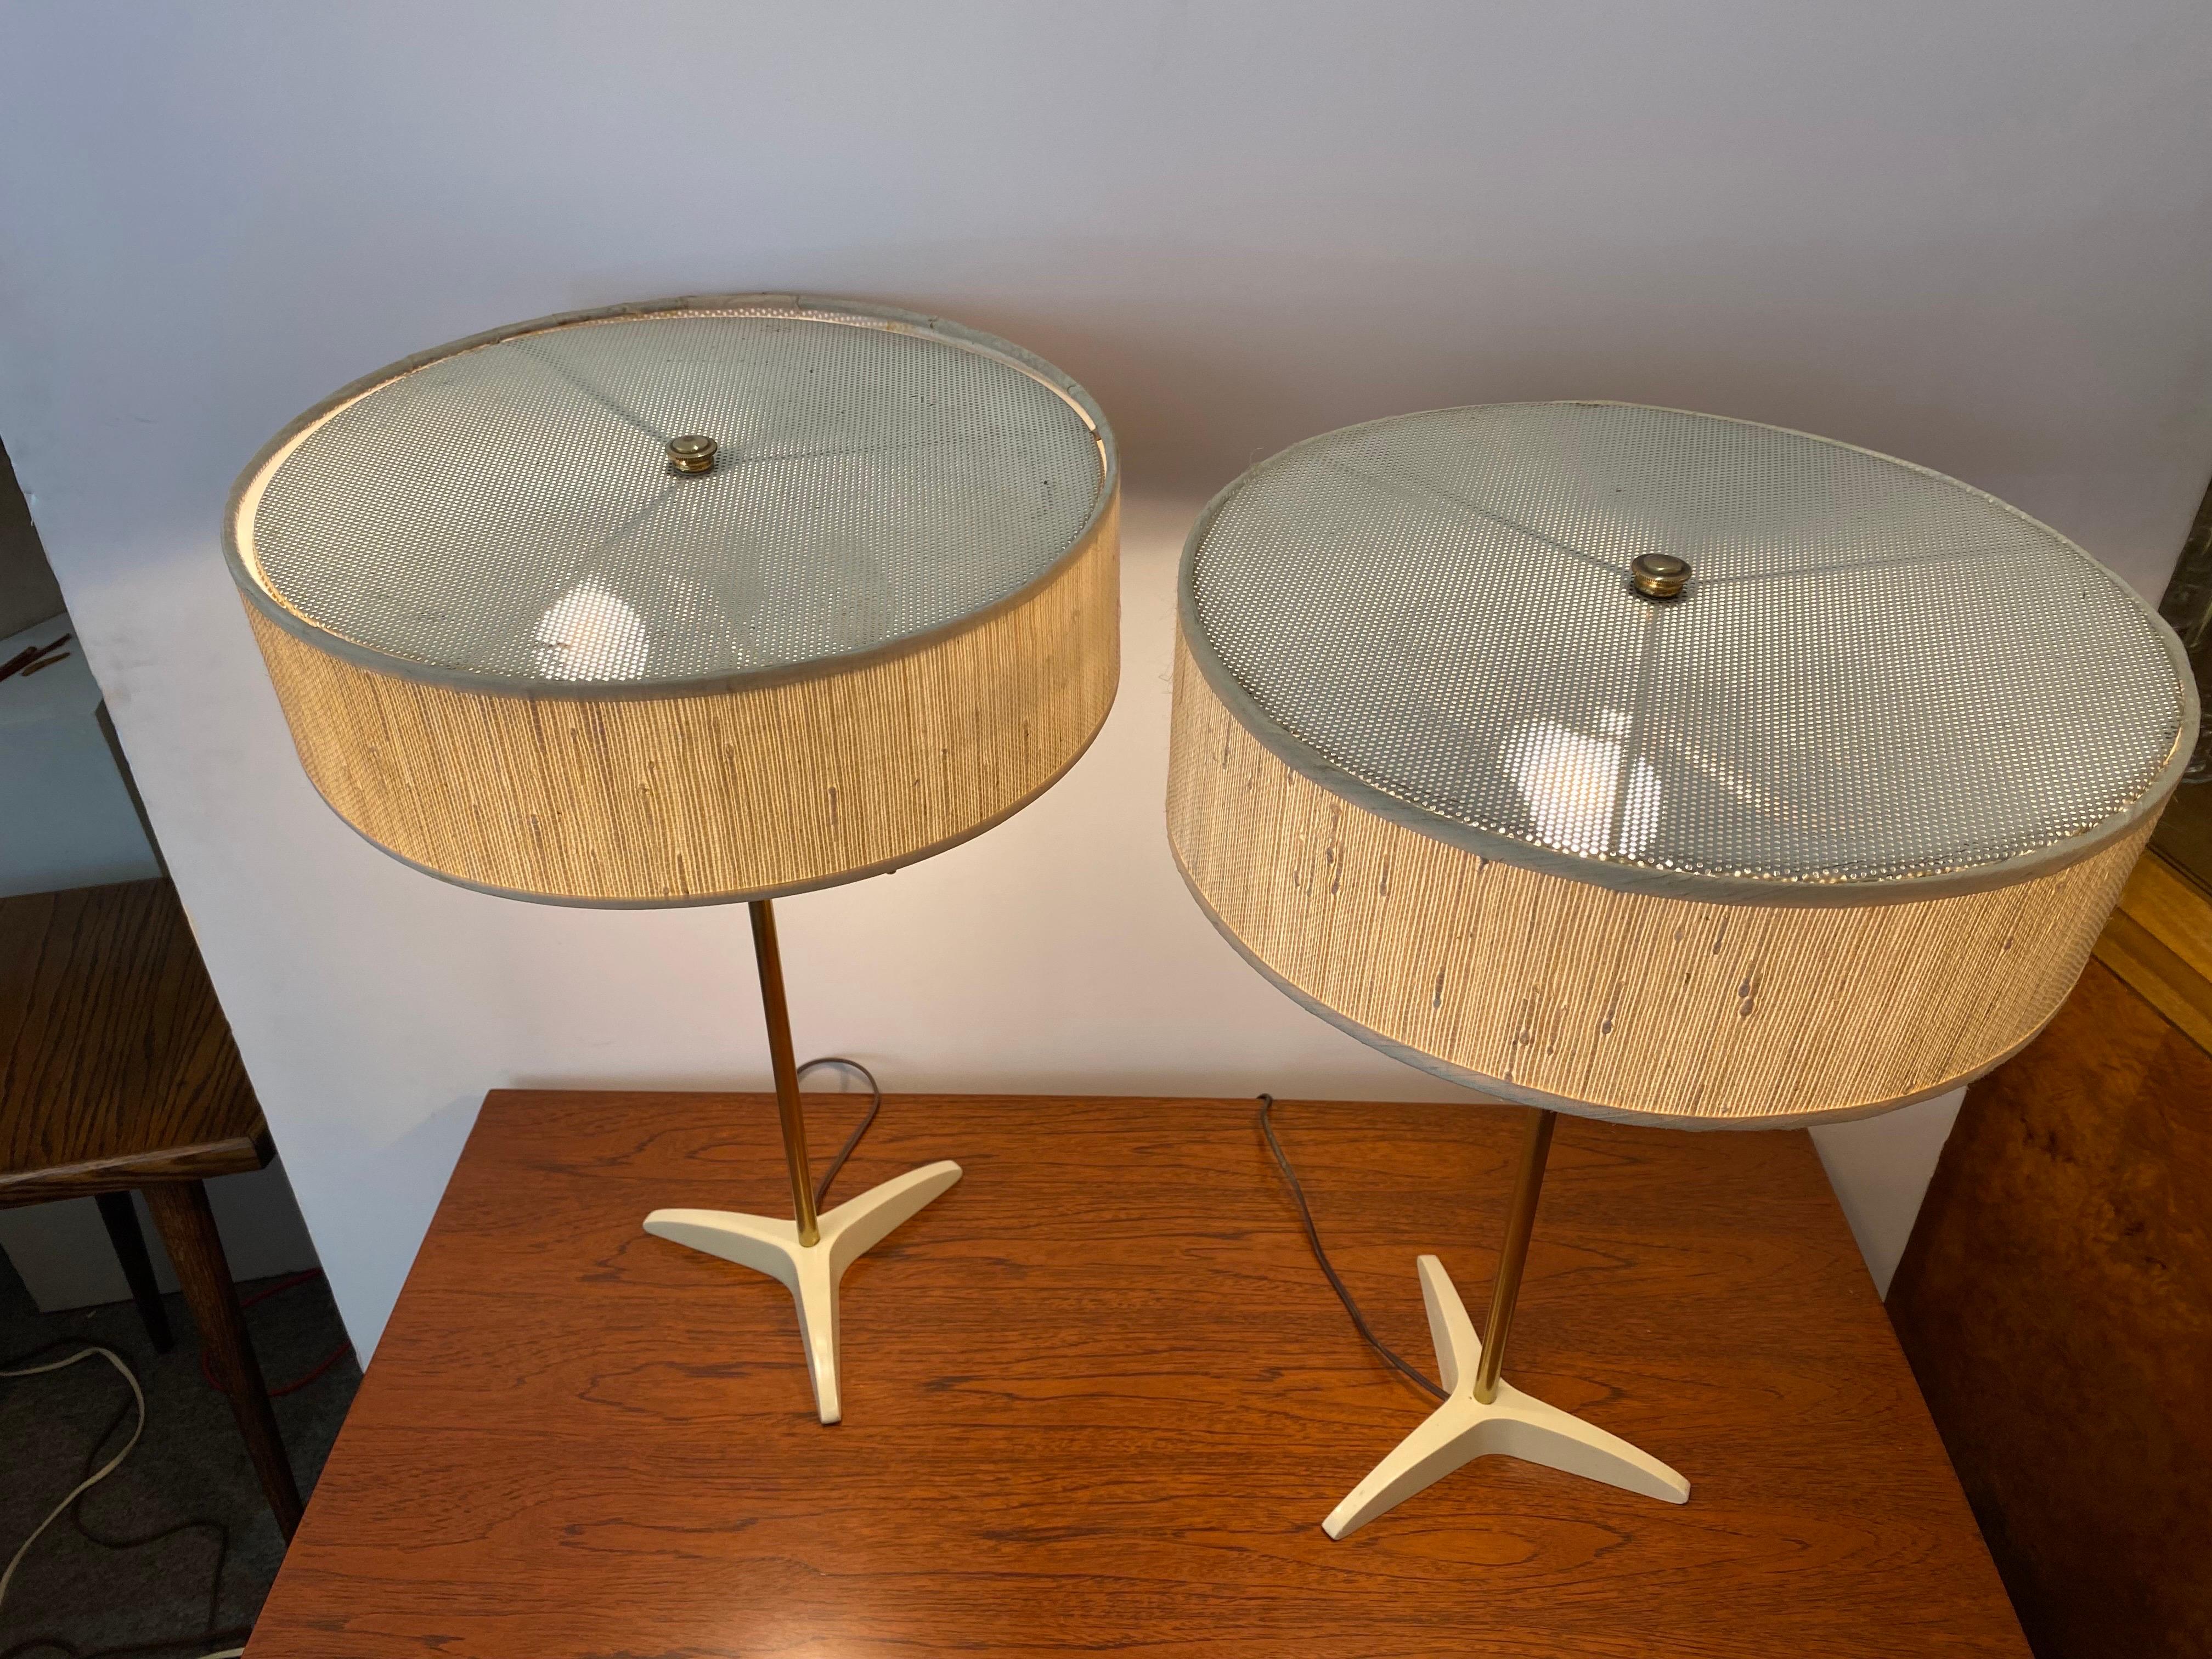 Pair of Stiffel brass pole table lamps. Newly recovered shades with the original frames. Two pull chain cords allow for one or two bulbs to be turned on. Elegant Simple Design! Retains Stiffel labels.